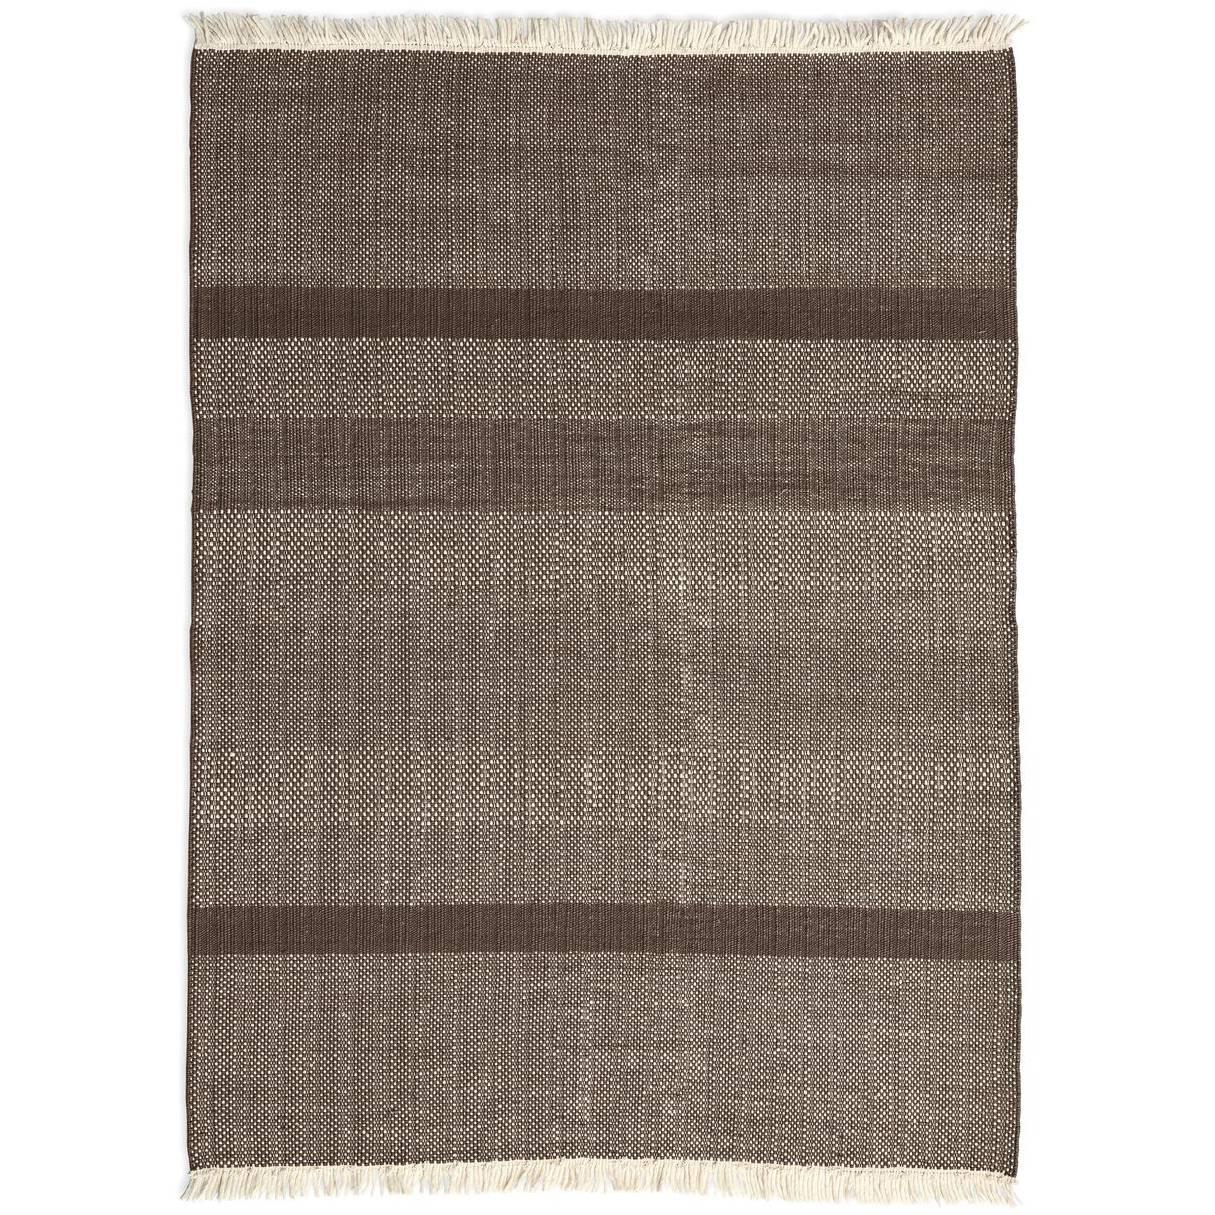 Tres Chocolate Hand-Loomed Wool and Felt Texture Rug by Nani Marquina